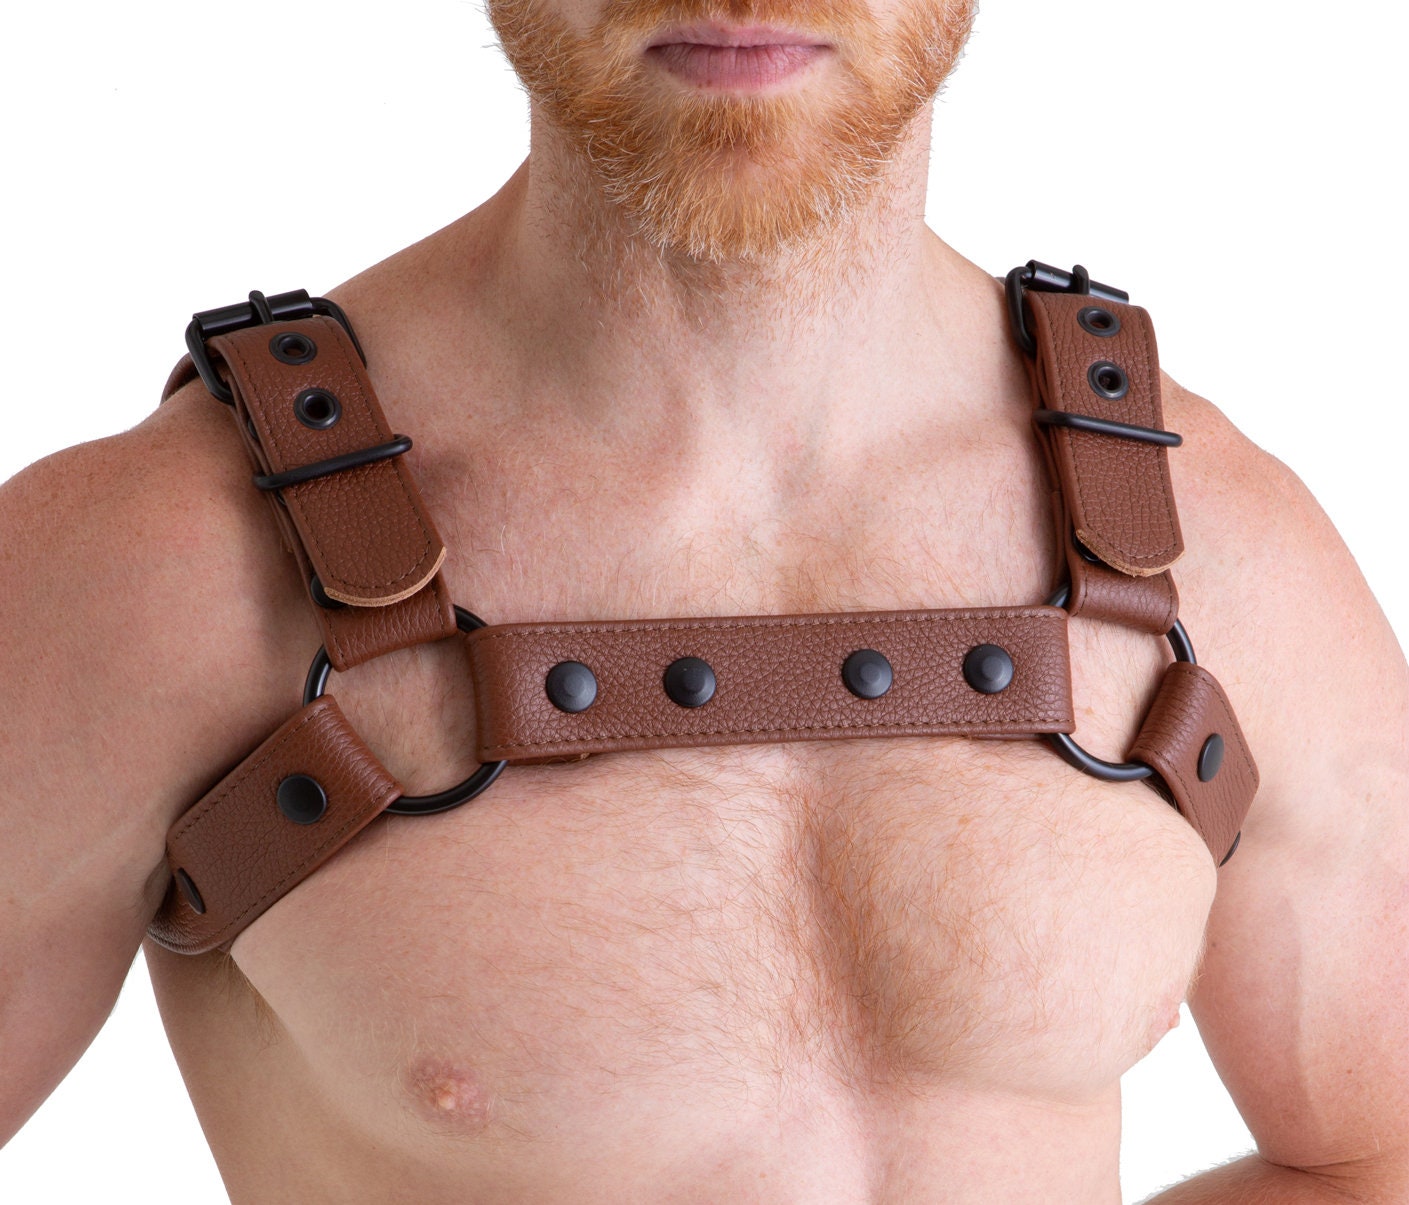 Original Harness for Men Leather Harnesses Brown Fashion 